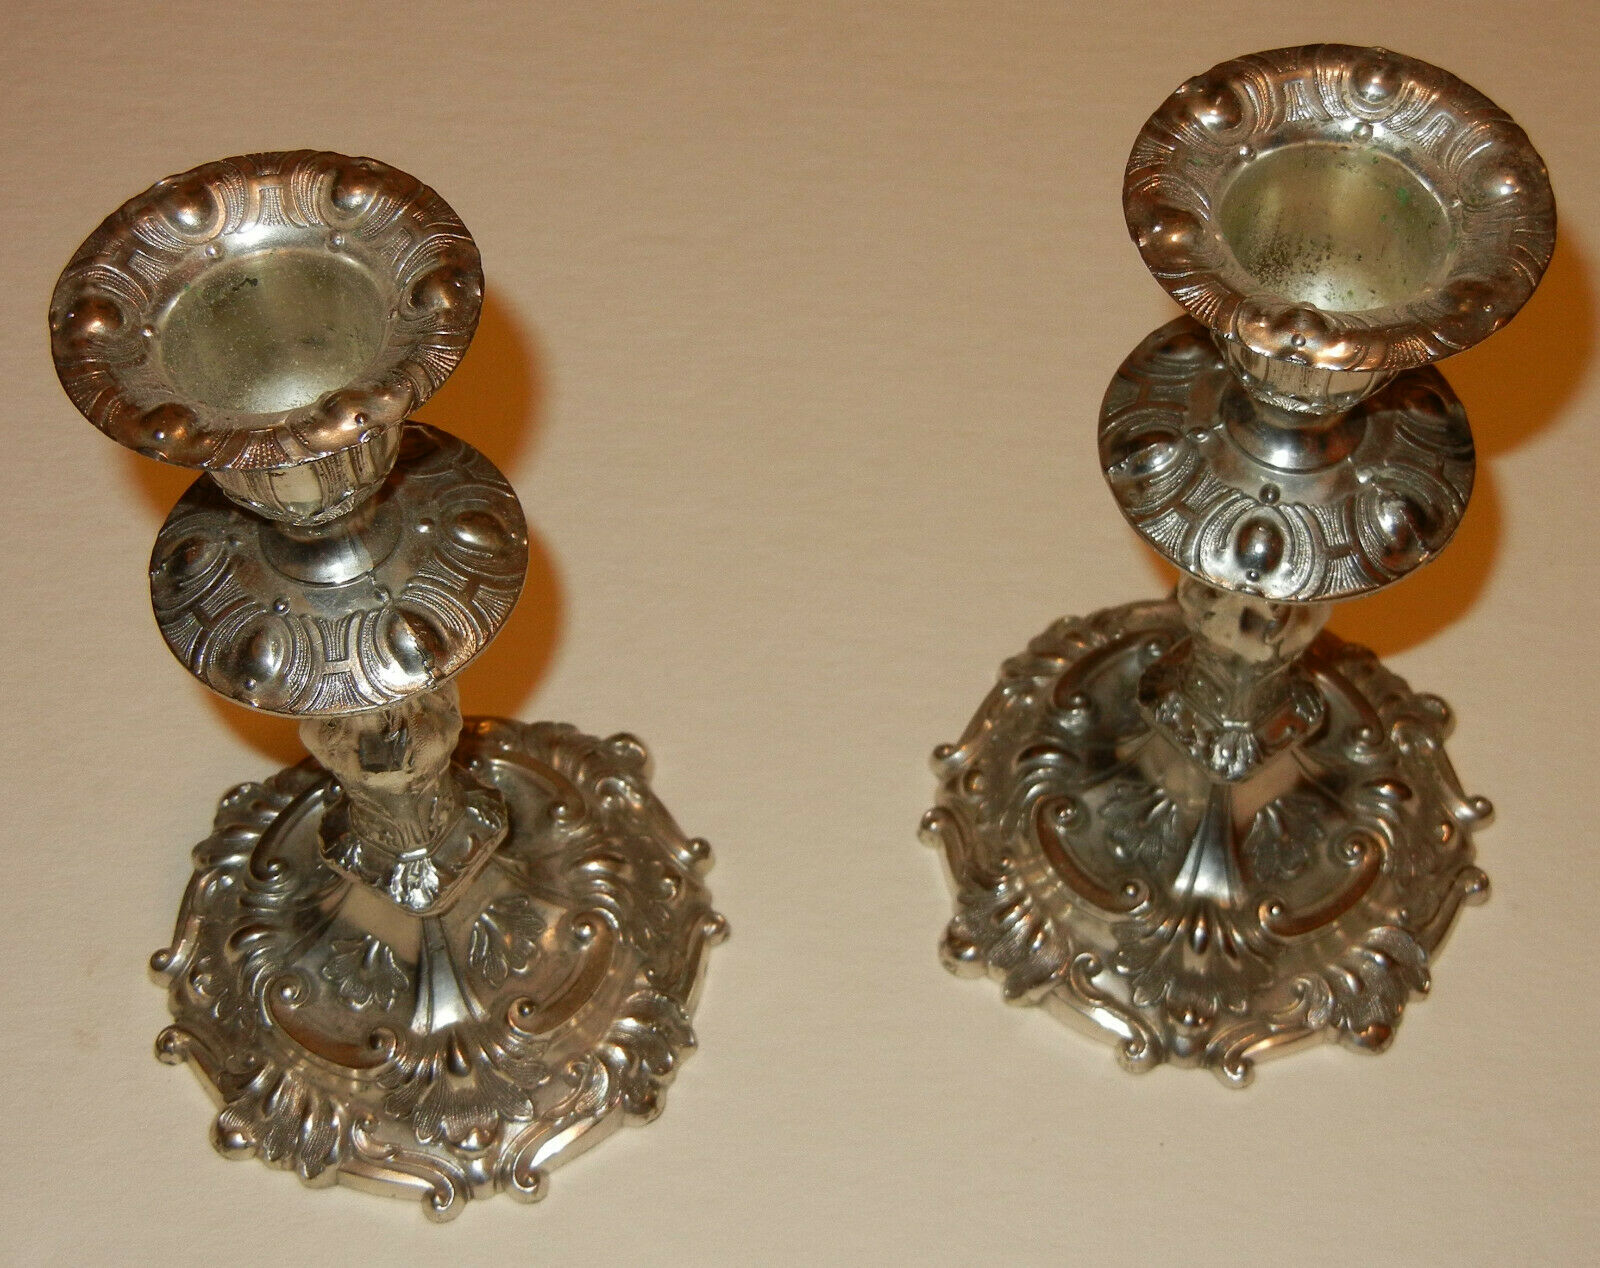 Vintage Silverplate Candle Holders Made in Japan